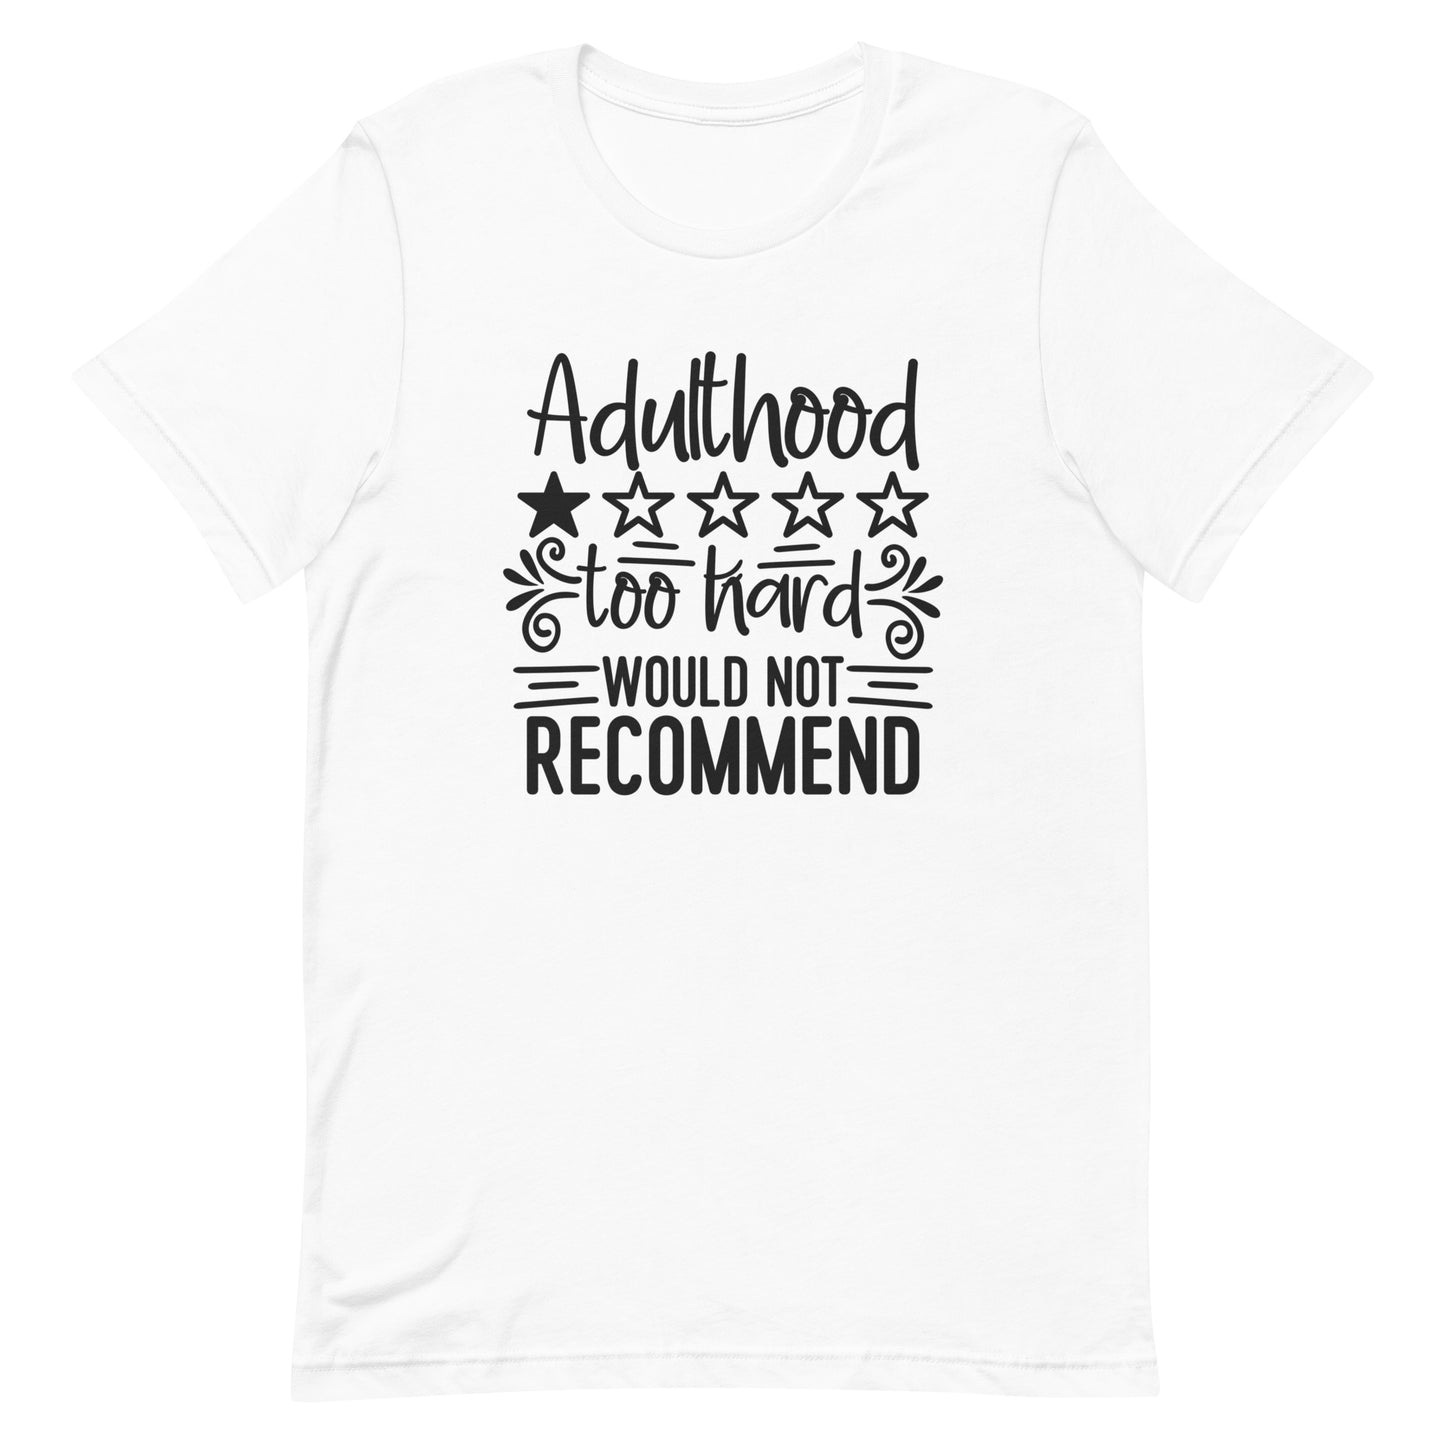 Adulthood Too Hard Would Not Recommend Tshirt